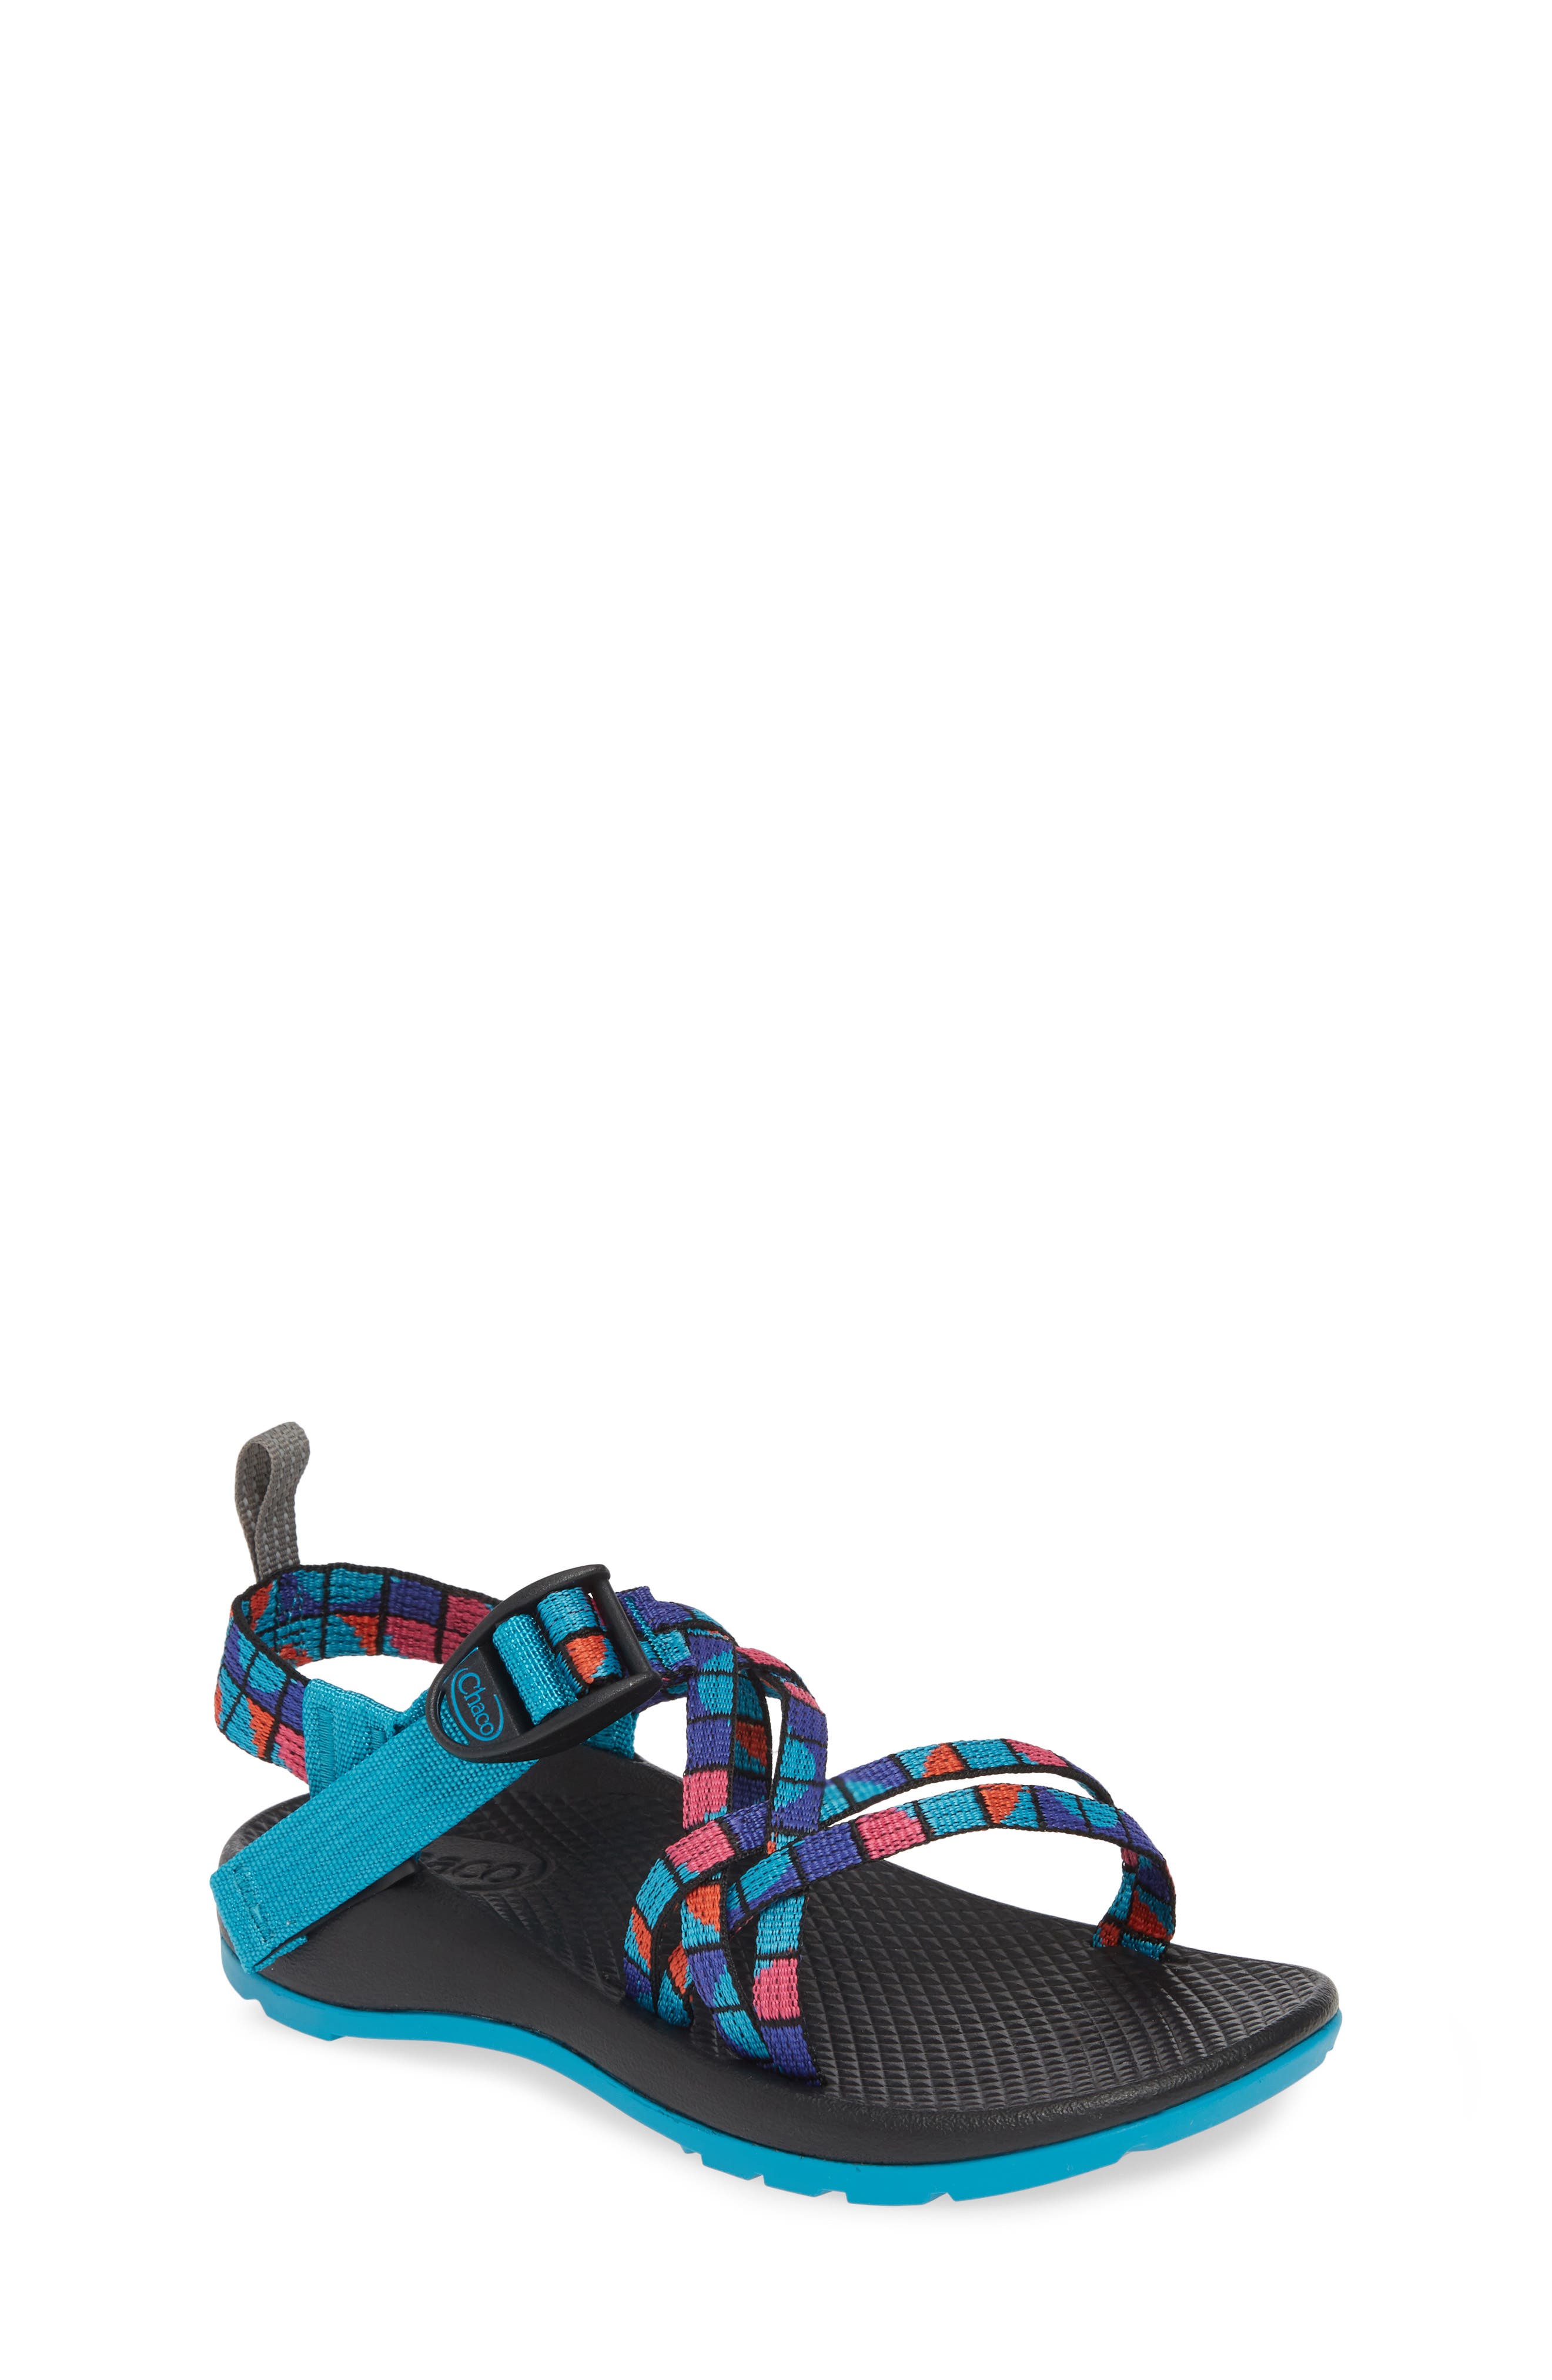 girls chacos size 5